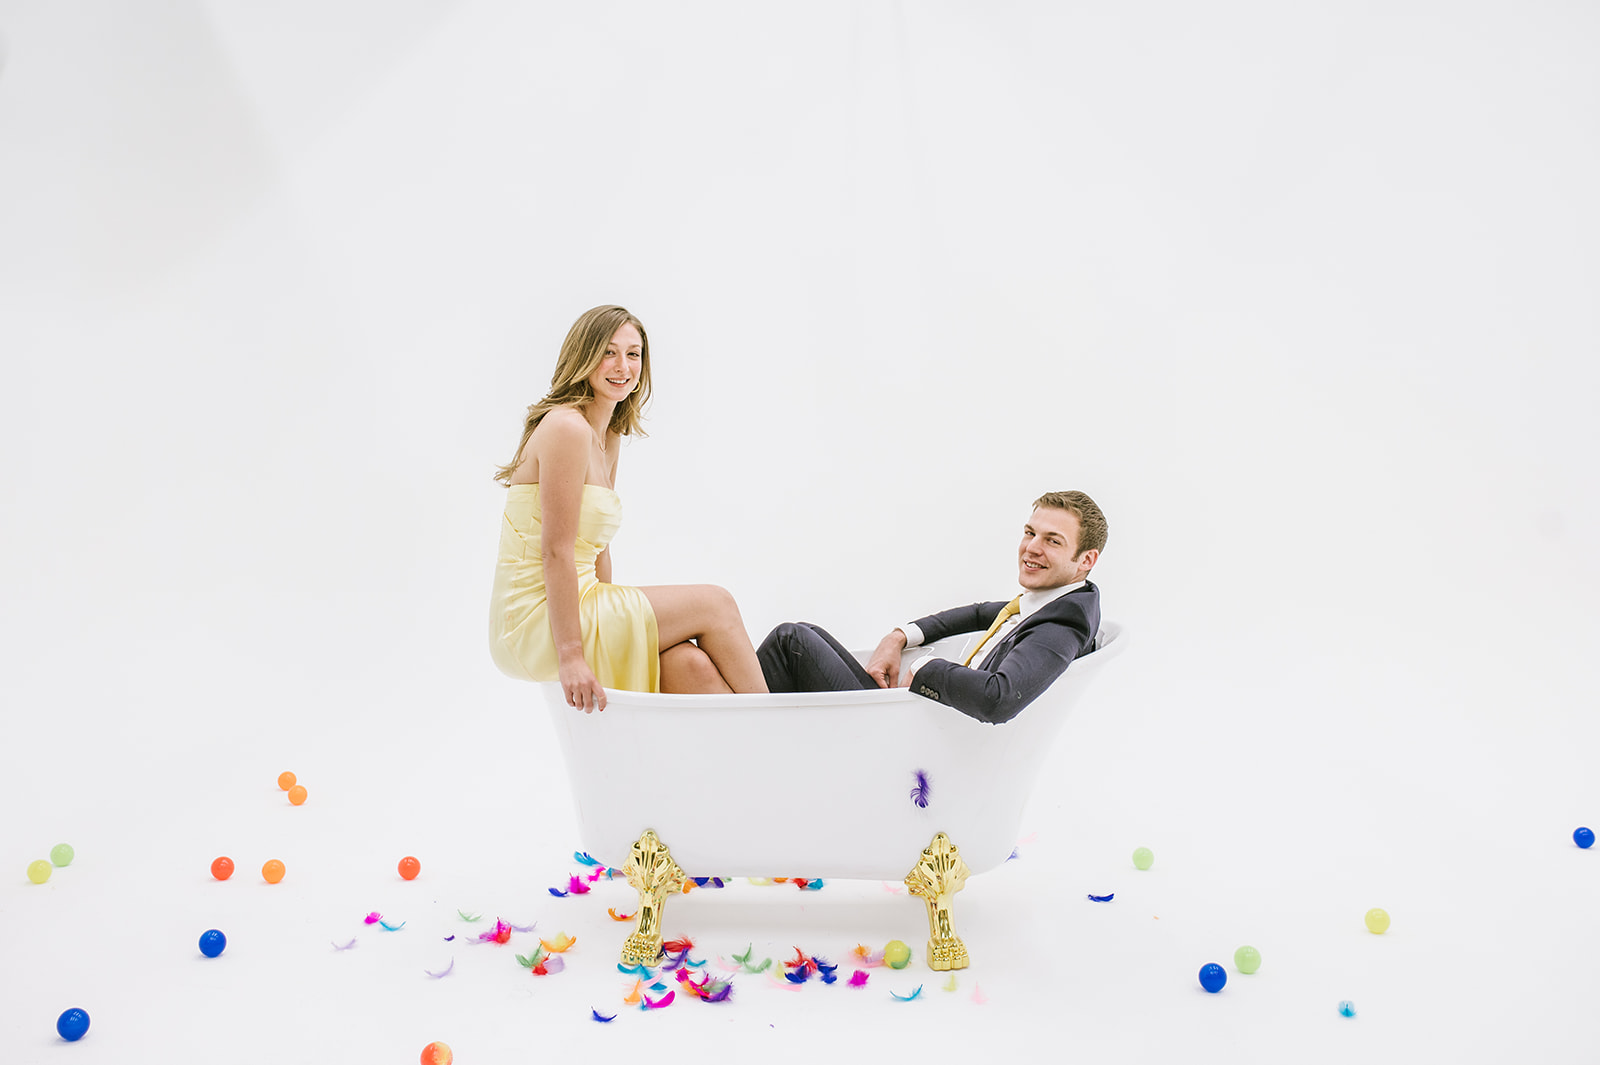 Fun and playful NYC engagement photoshoot in studio